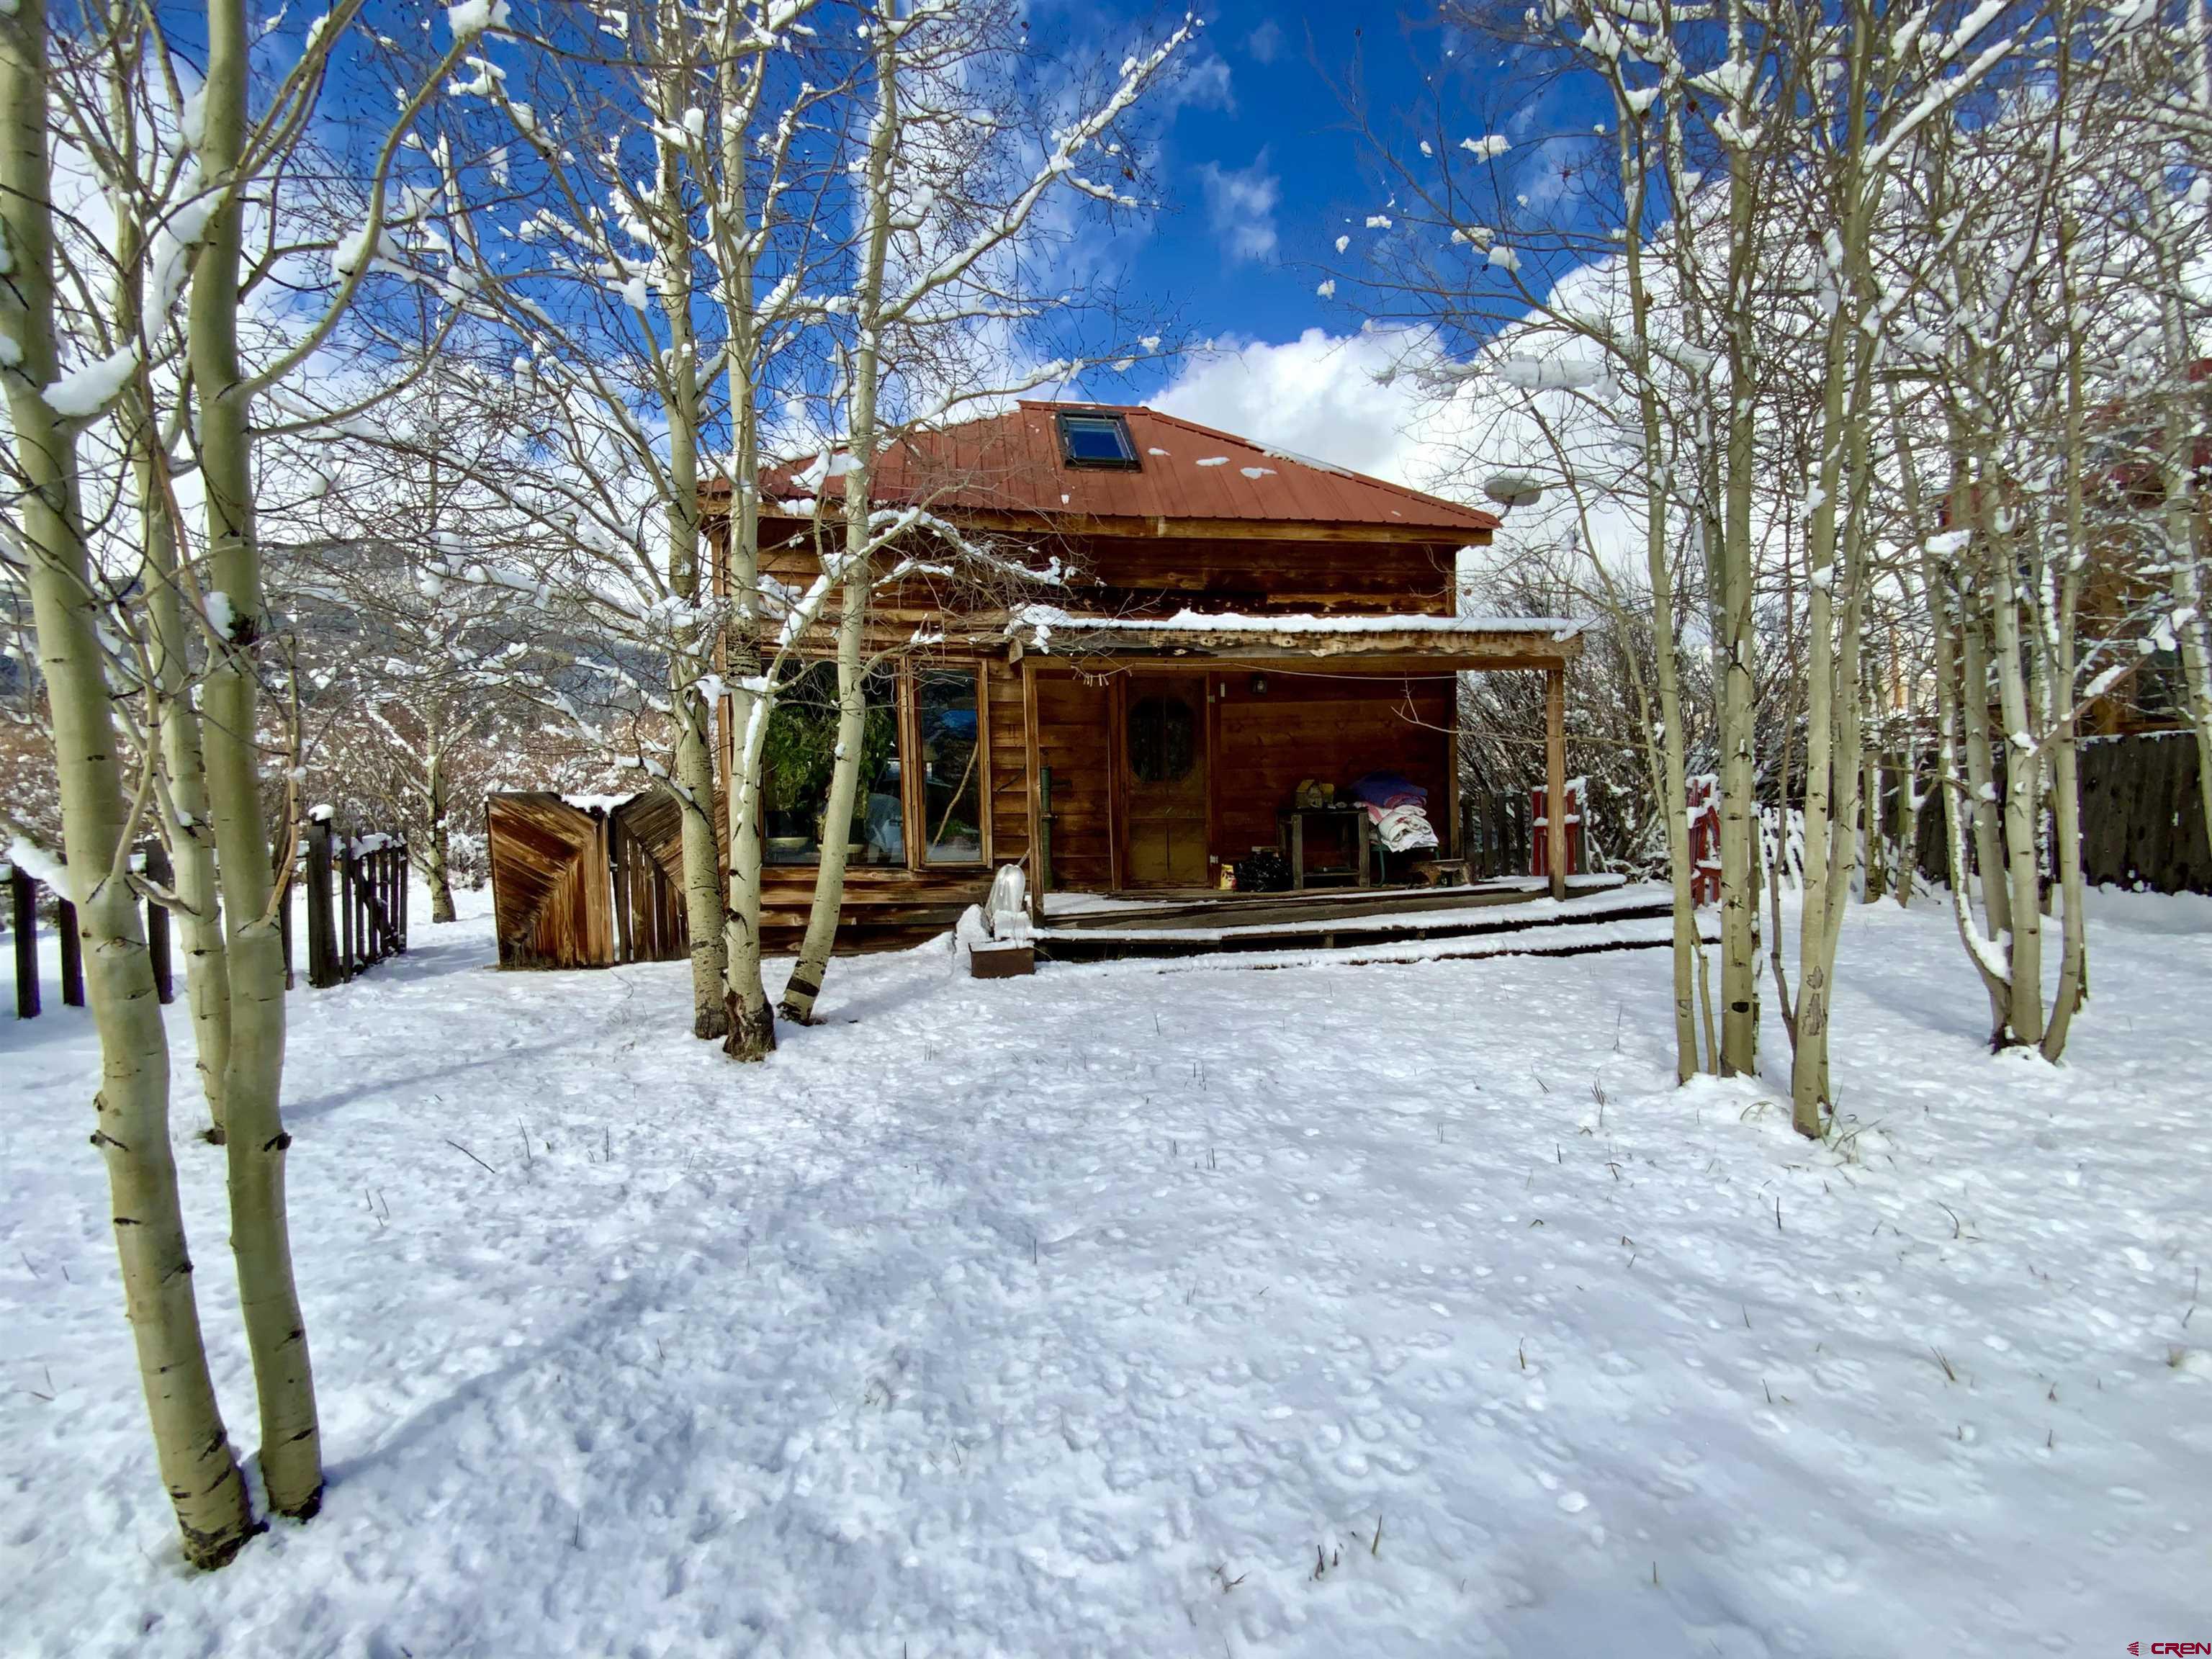 Comfortable and cozy cabin at a quiet and peaceful end of the road location in the town of Pitkin, just 45 minutes from Gunnison.  One bedroom/1 bath home sits on 4 lots and offers willows for privacy and an aspen forest out front with a miscellaneous outbuilding that would make a great workshop or could be updated for a guest house.  Open kitchen and dining room feature a Range/Oven, Microwave, Refrigerator and the house is heated with a woodstove and electric baseboard.  Plenty of passive solar through the windows with occasional moose, deer and elk visits.  Two woodsheds out front, well, shared septic and metal roof.  The washer and dryer are in the spacious bathroom and there’s an office nook off the living room with coat closet and under the stair storage.  Currently used as a year-round home but would make a great summer cabin or hunting cabin!